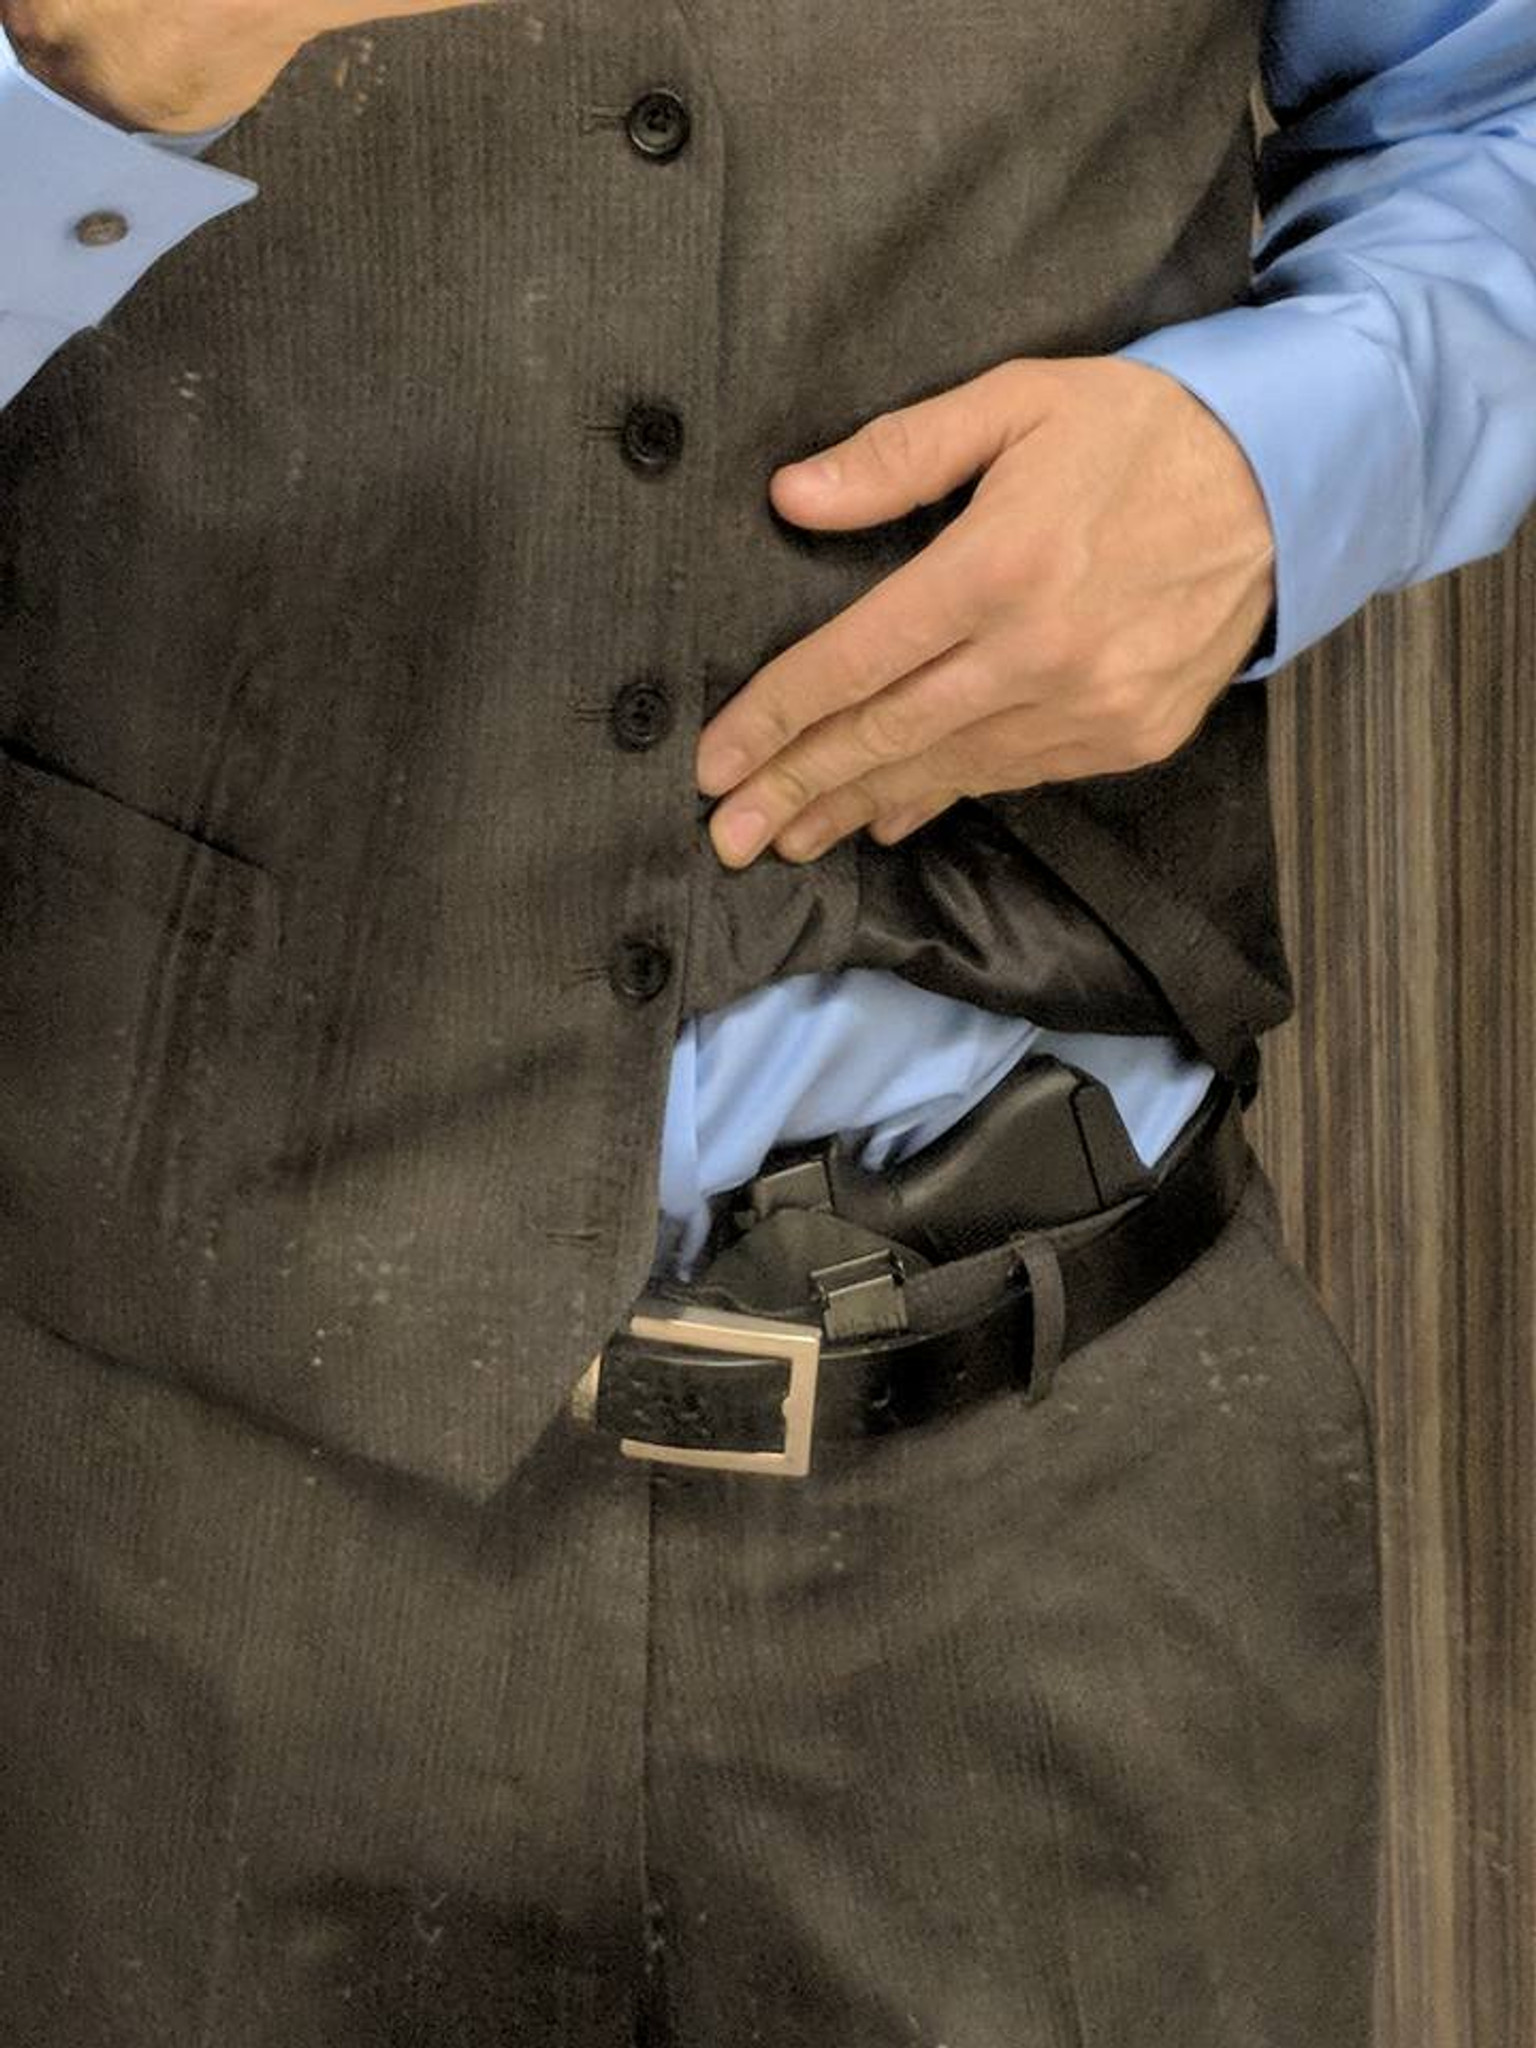 Ulticlip Inside-the-Waistband Holster: Quick-Ship